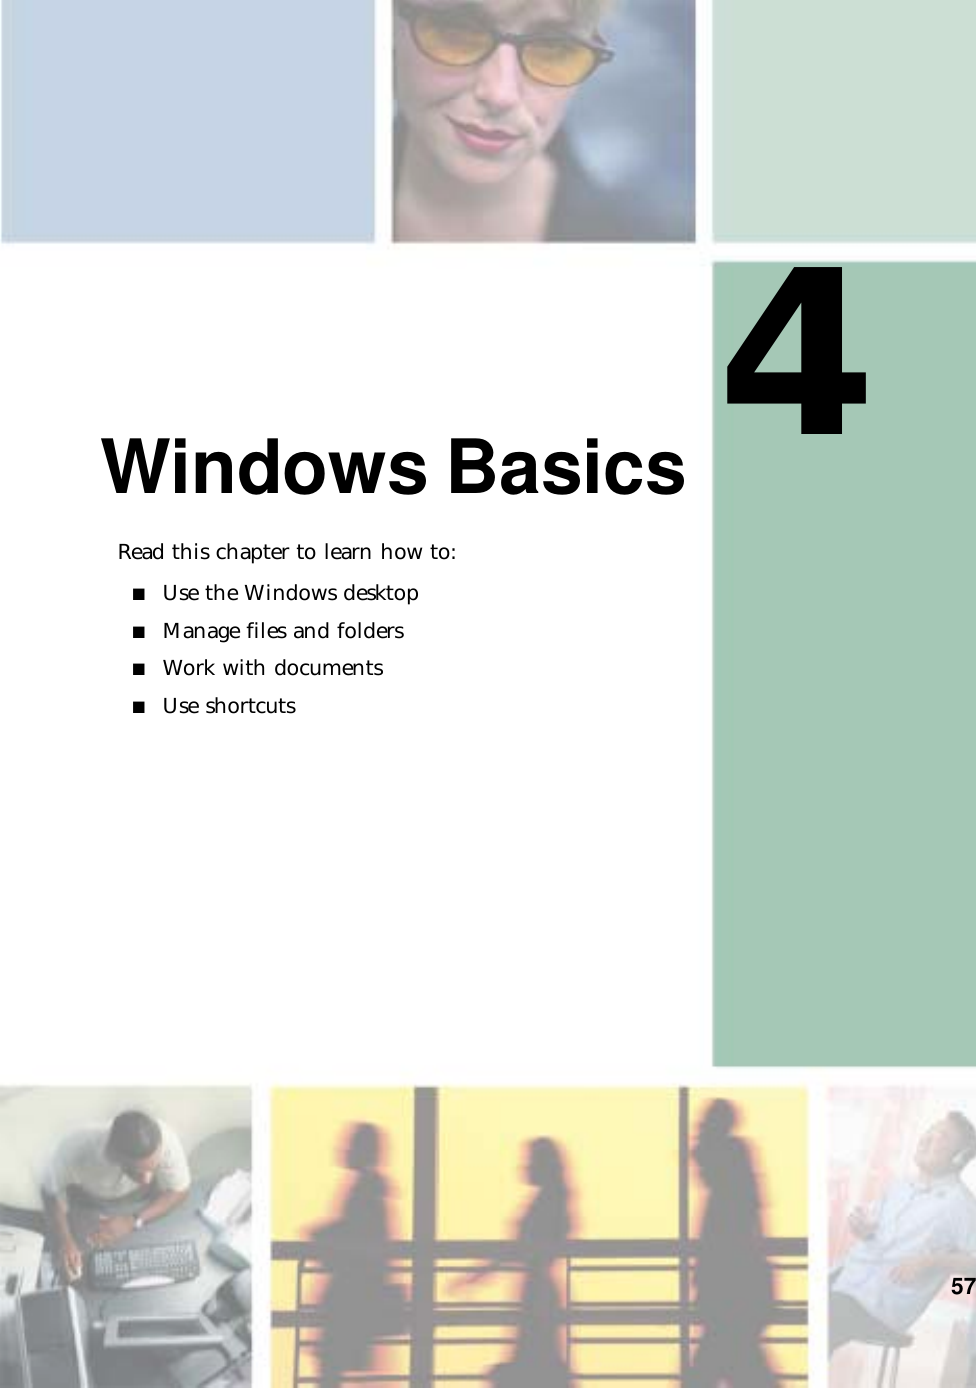 457Windows BasicsRead this chapter to learn how to:■Use the Windows desktop■Manage files and folders■Work with documents■Use shortcuts